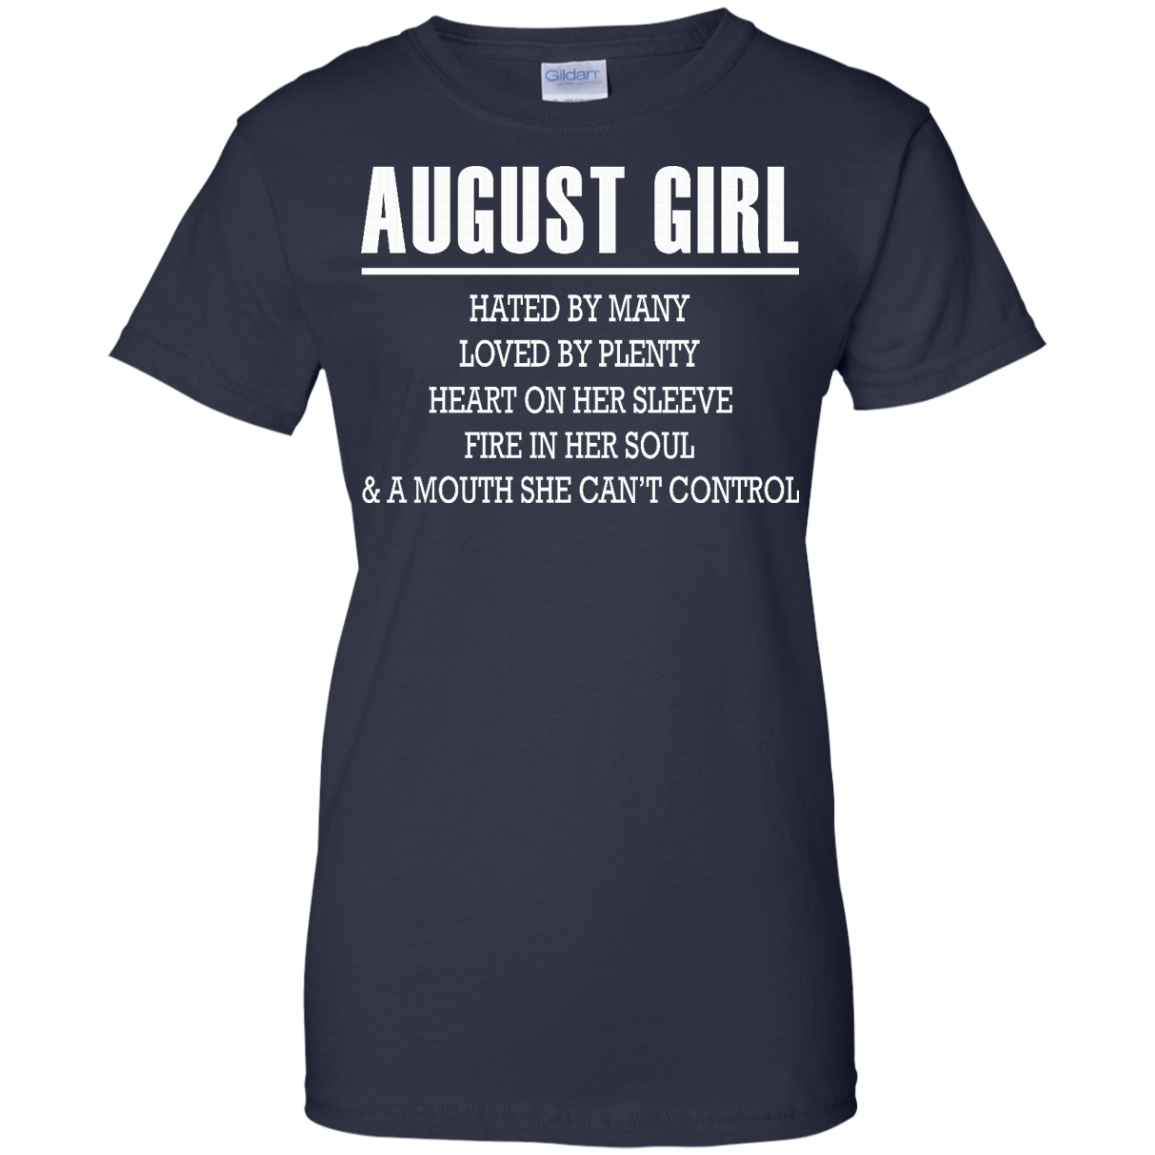 August Girl - Hated By Many, Loved By Plenty Heart On Her Sleeve T-Shi ...